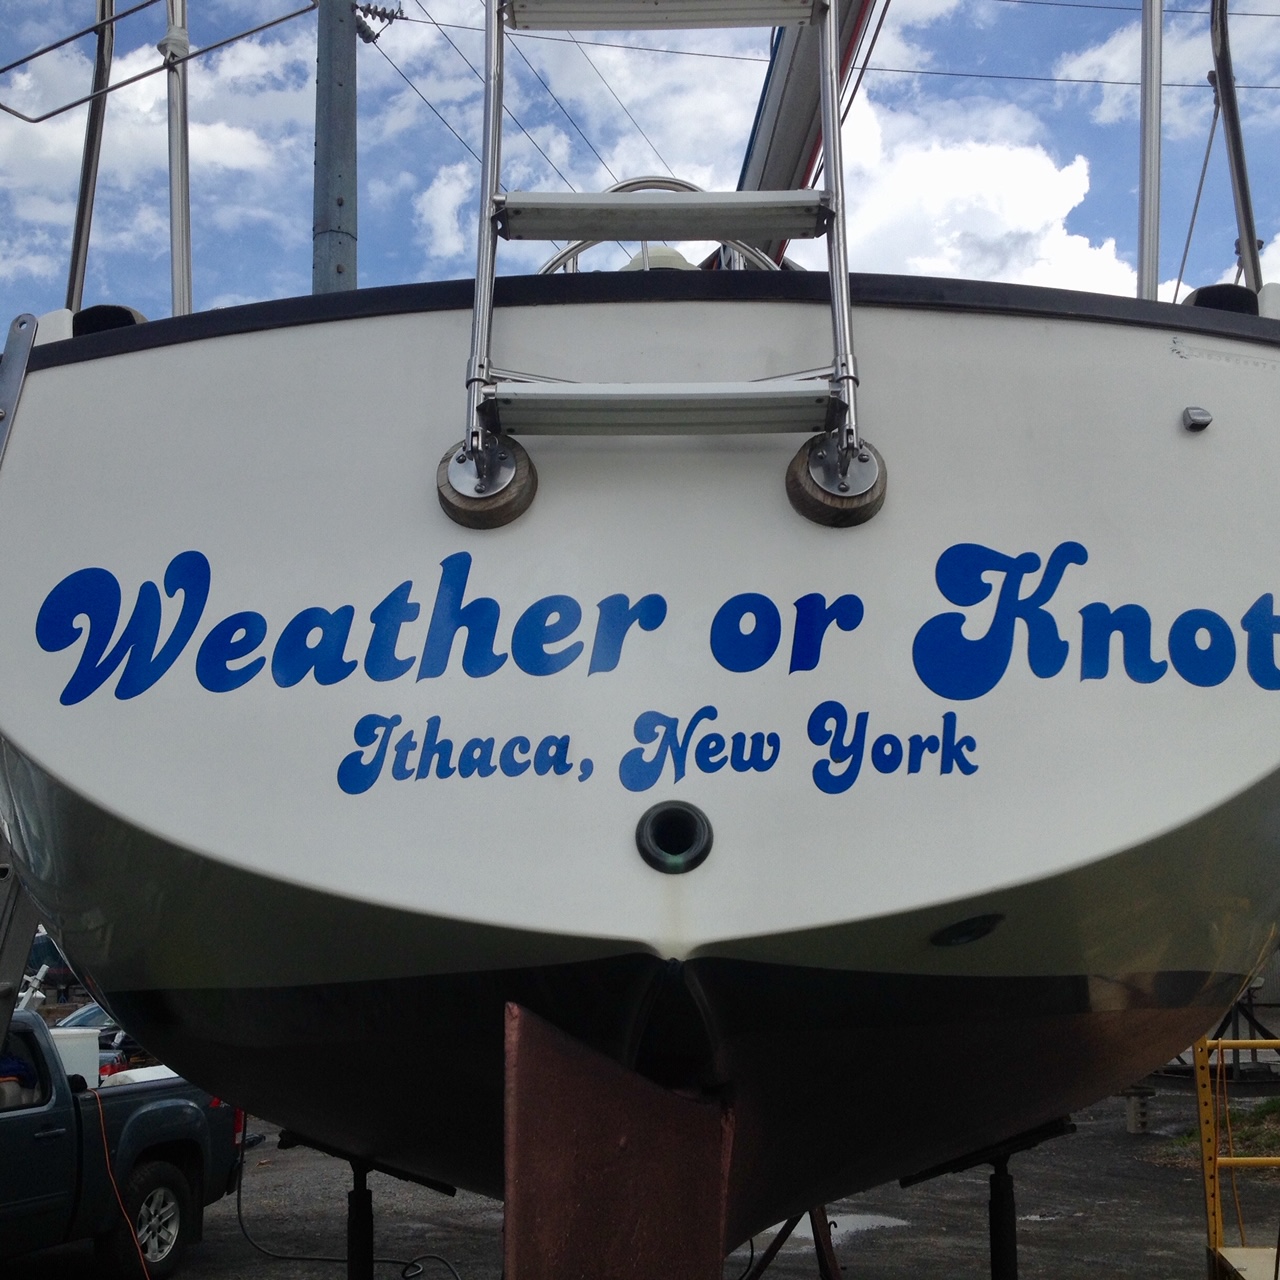 Registration and Name lettering for new to me boat